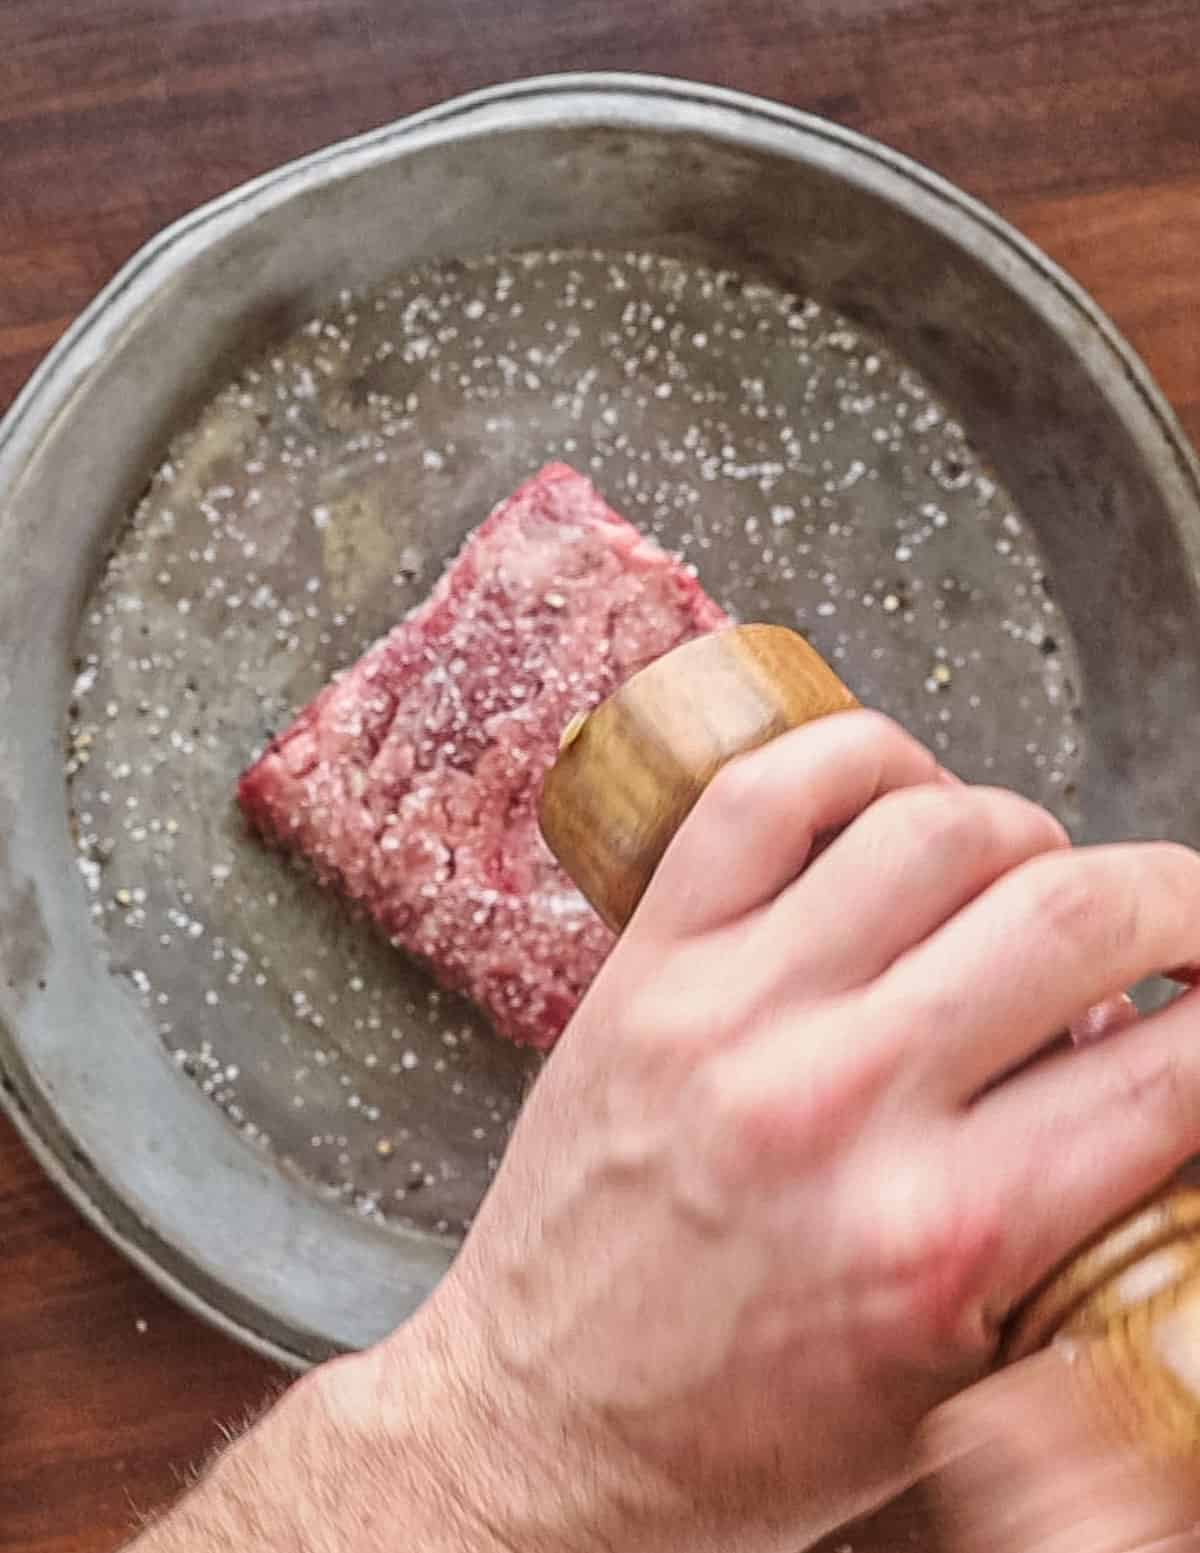 Seasoning a steak with pepper before cooking.